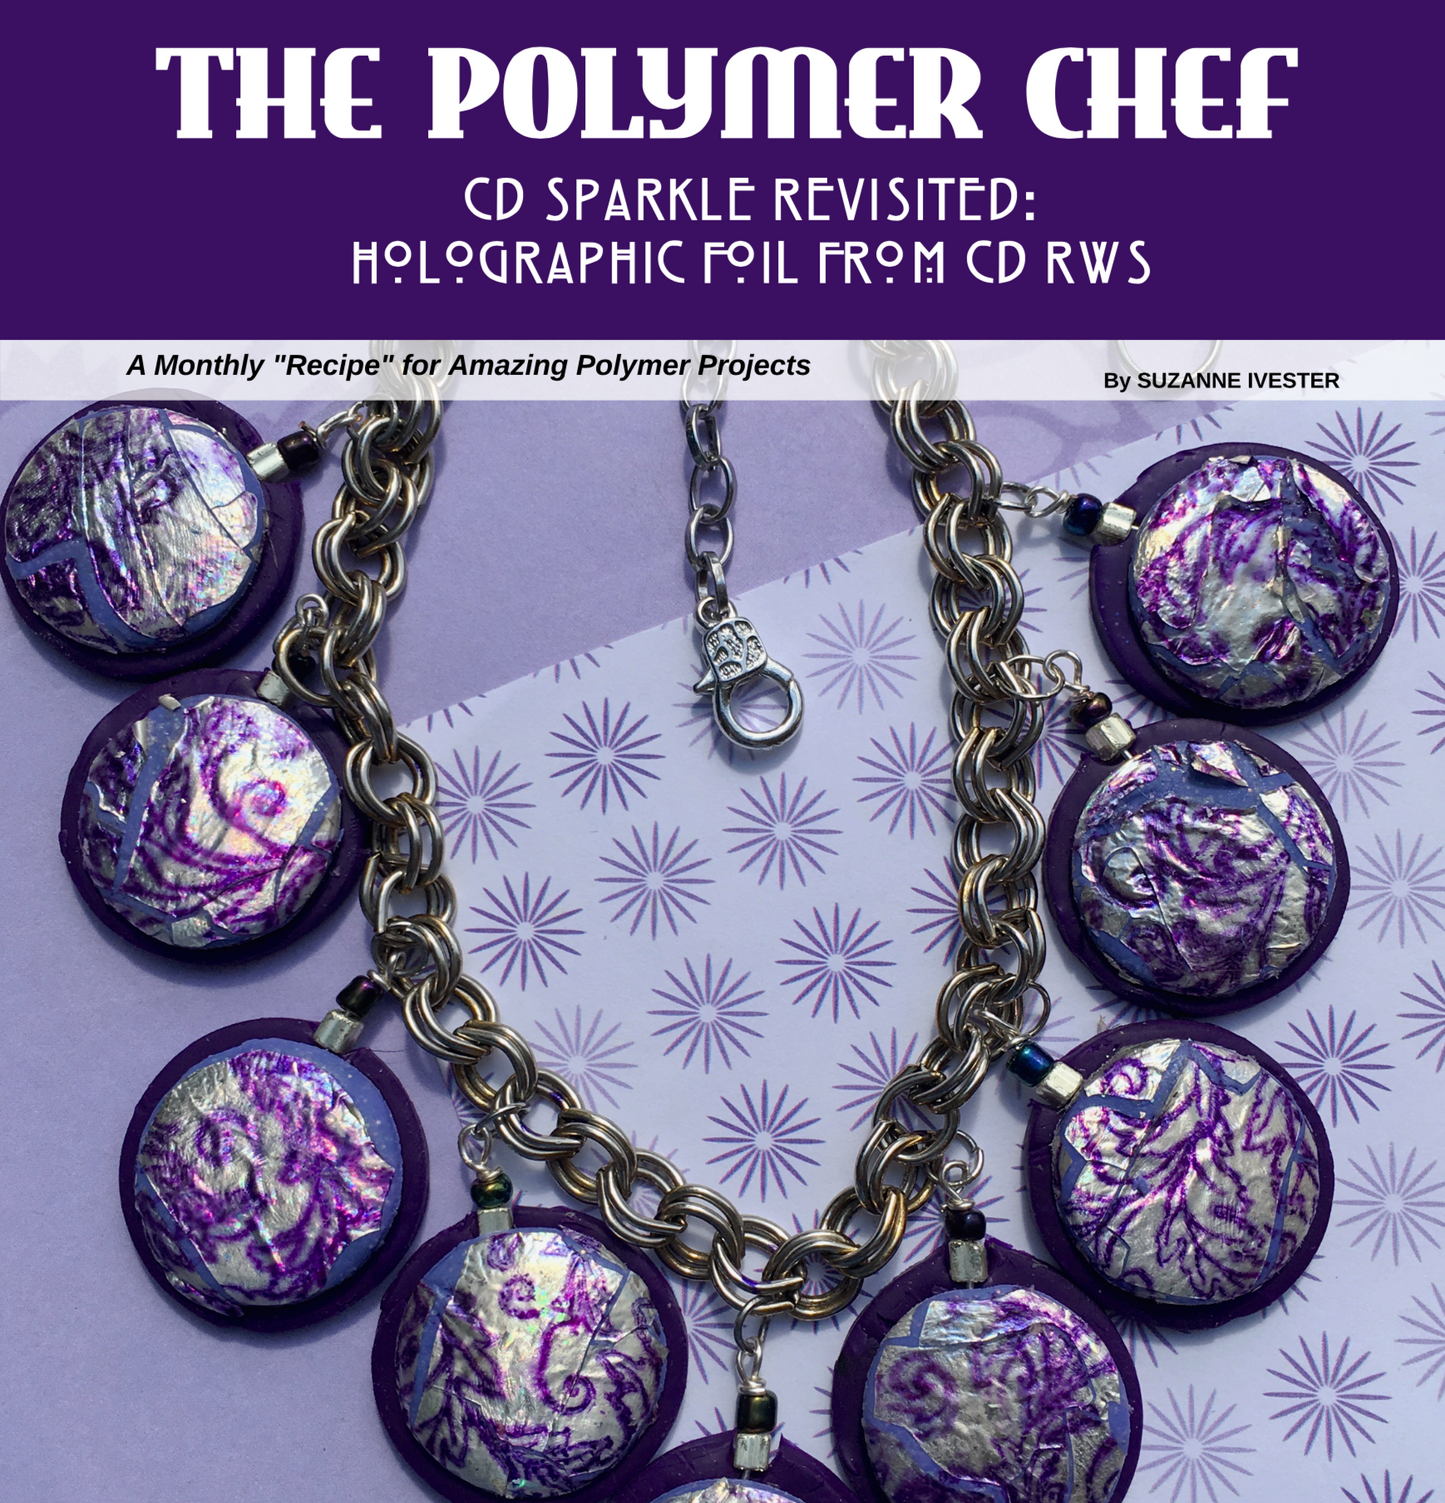 April 2019 Passion for Polymer digital Downloadable PDF magazine tutorials - Polymer Clay TV tutorial and supplies